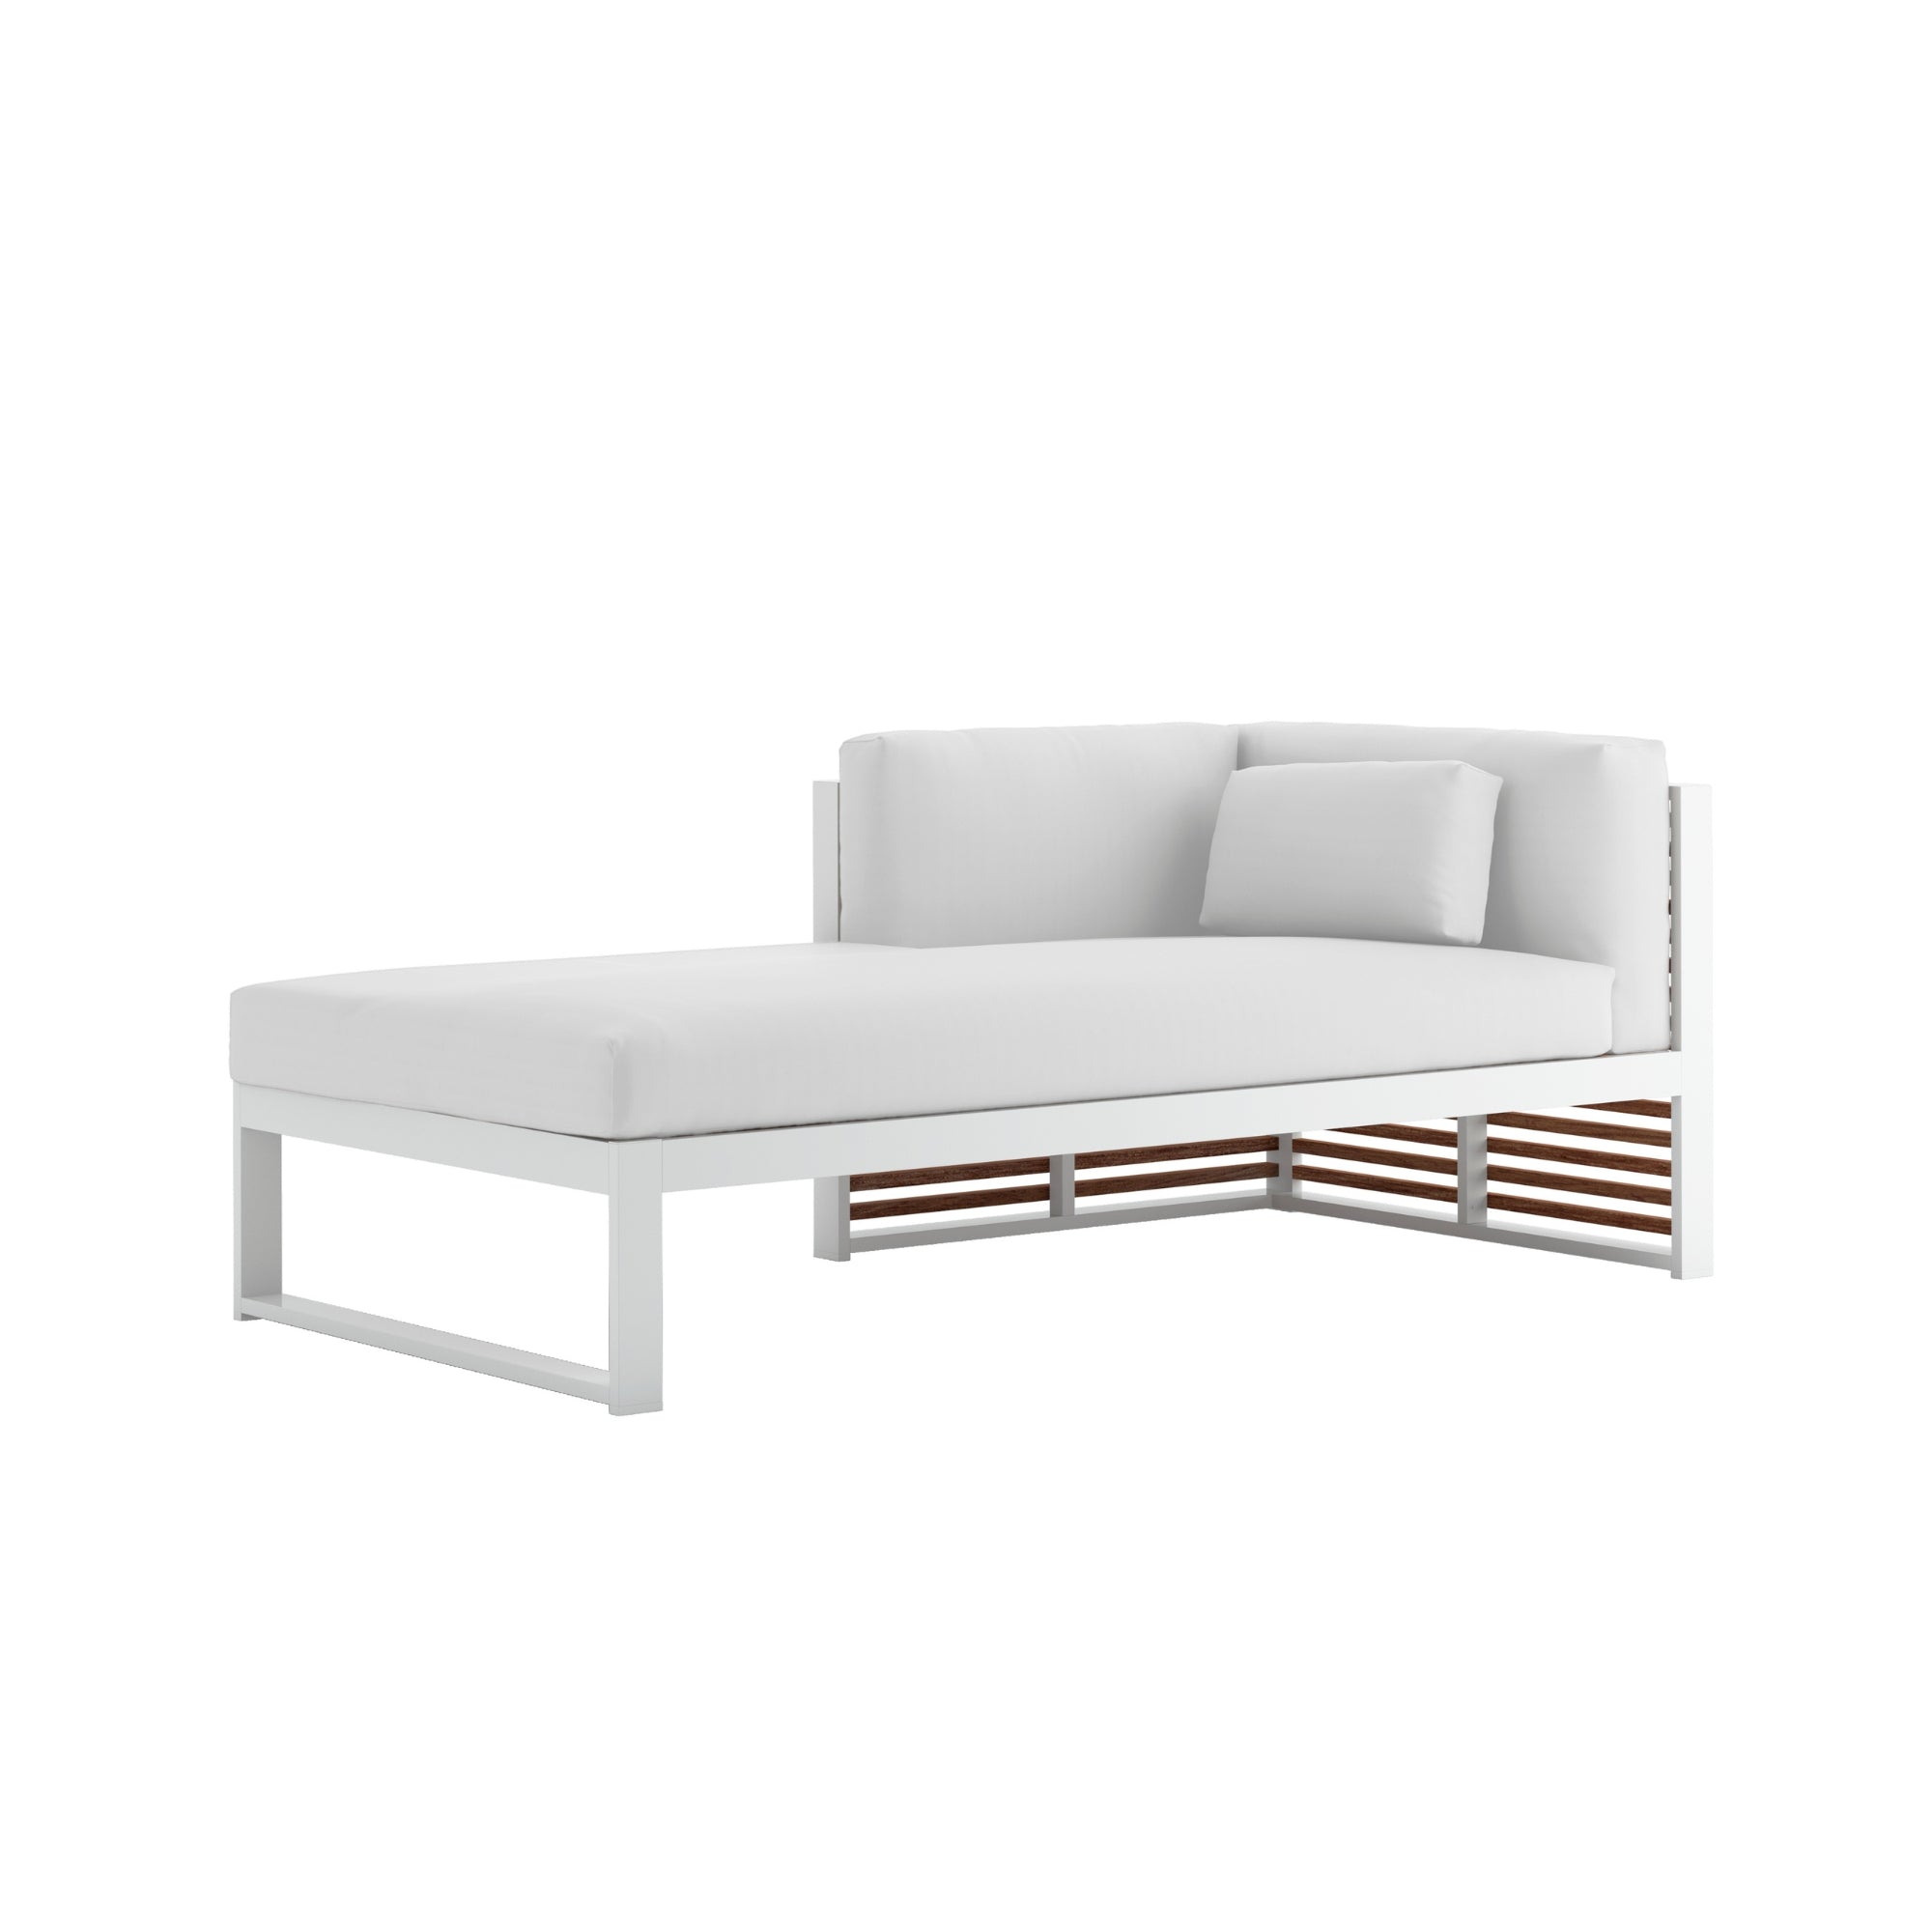 DNA Teak Sectional 2 - THAT COOL LIVING